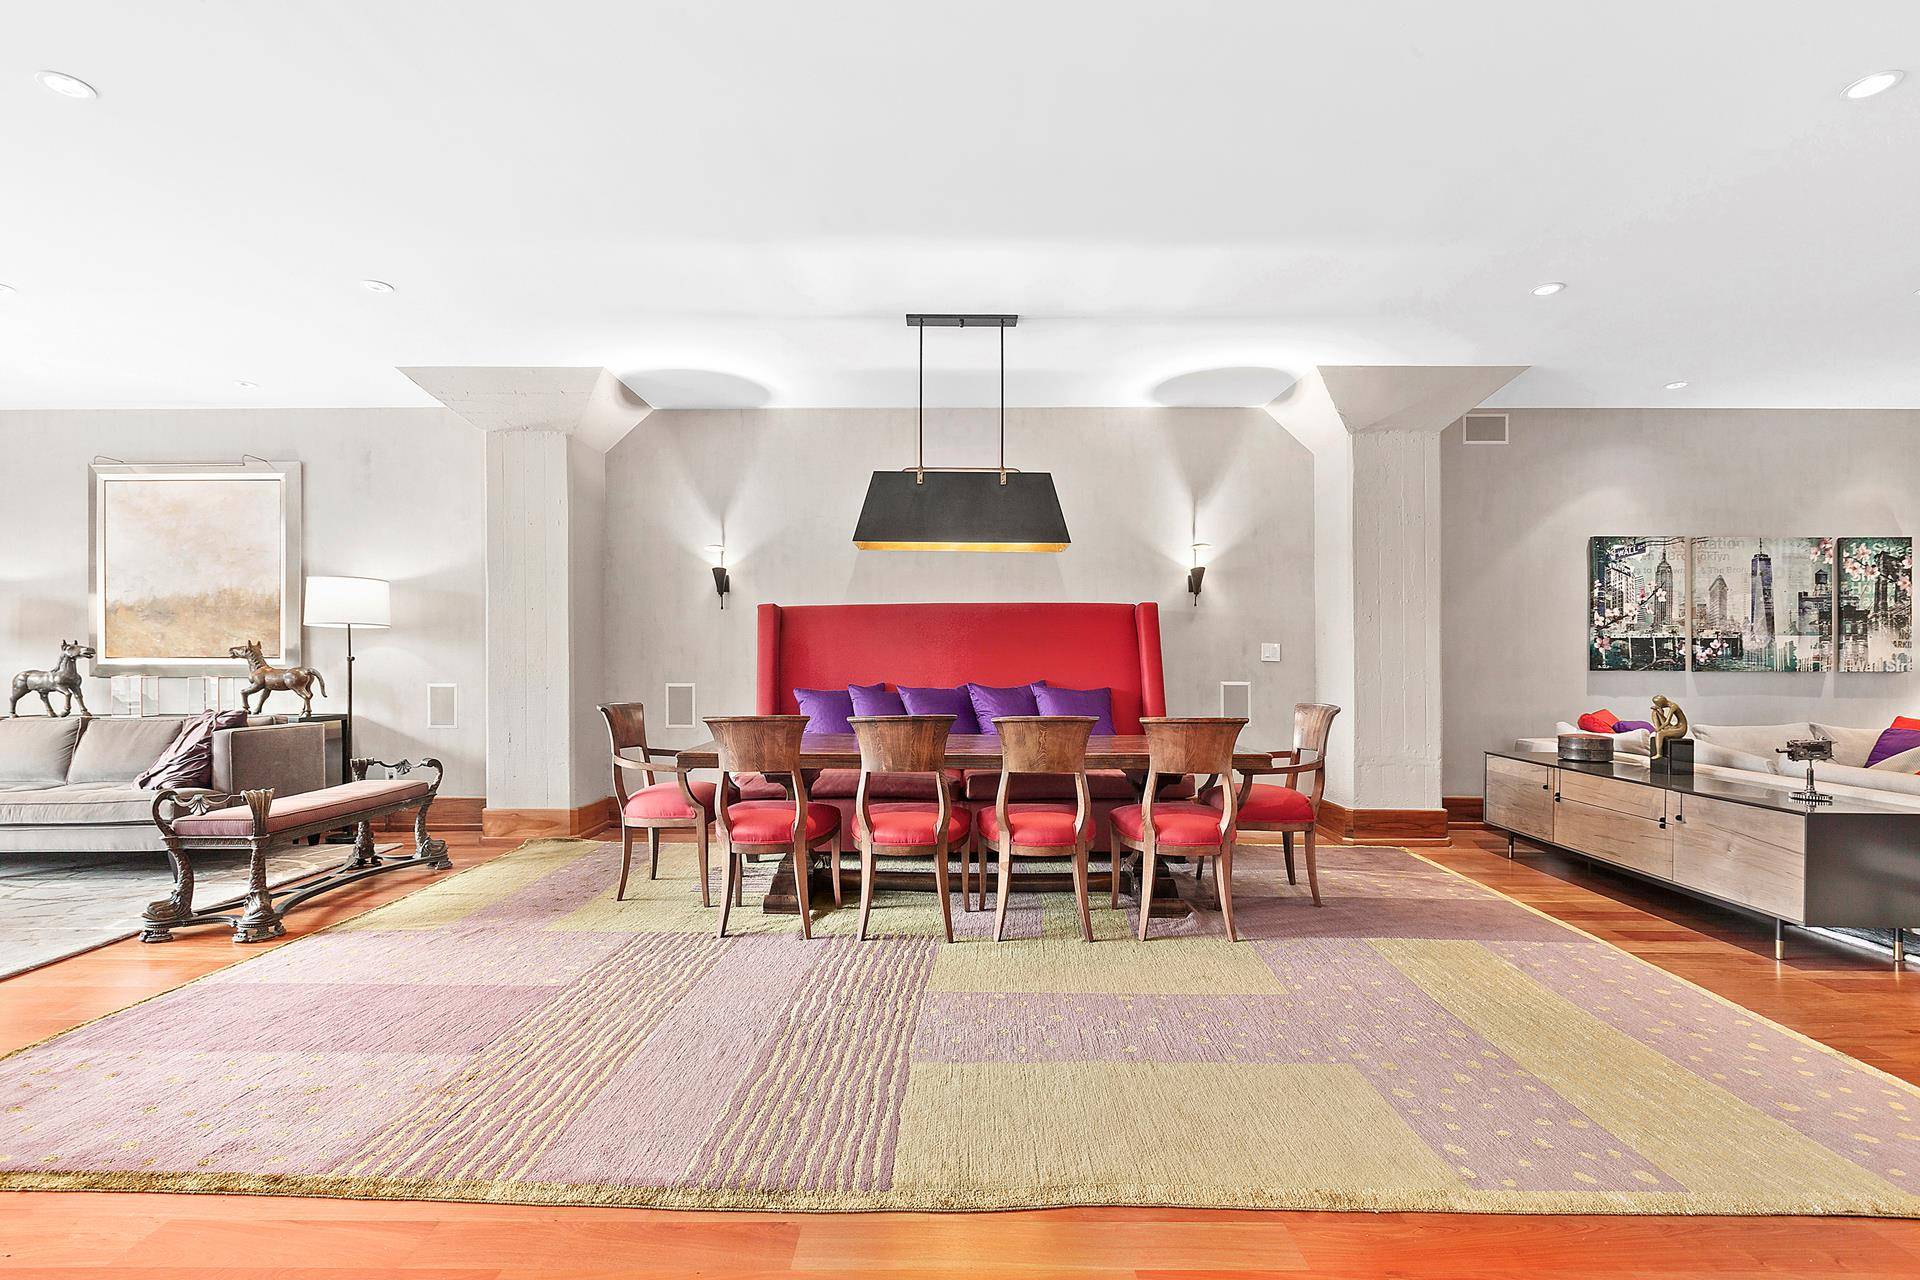 One of the most sought after buildings in TriBeCa, The Atalanta was built in 1924.